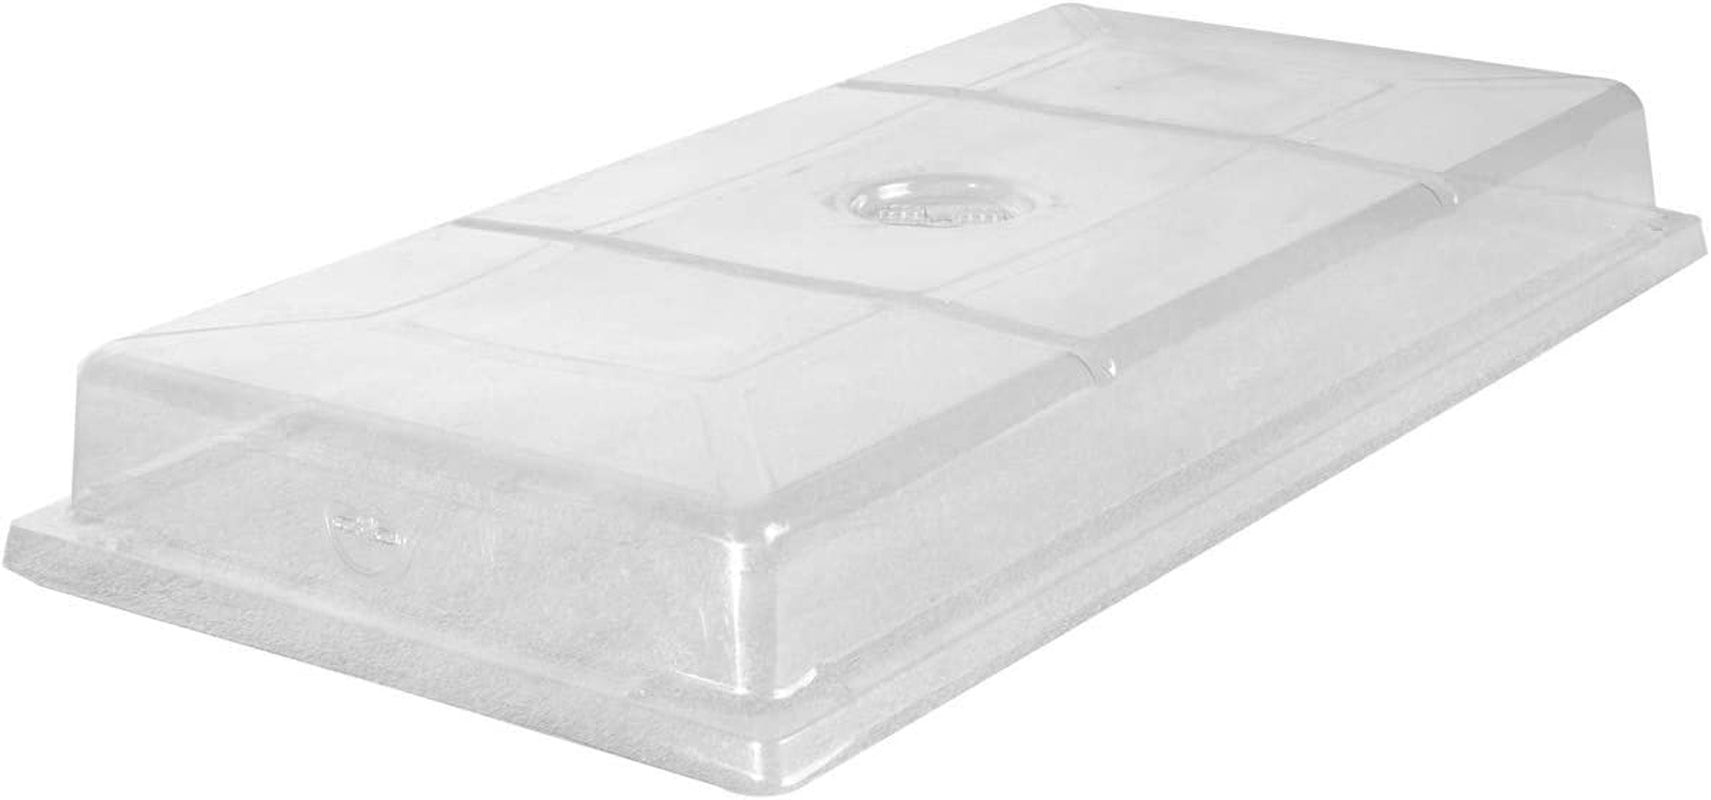 Jump Start CK64050 Germination Station W/Heat Mat Tray, 72-Cell Pack, One Size, 2" Dome